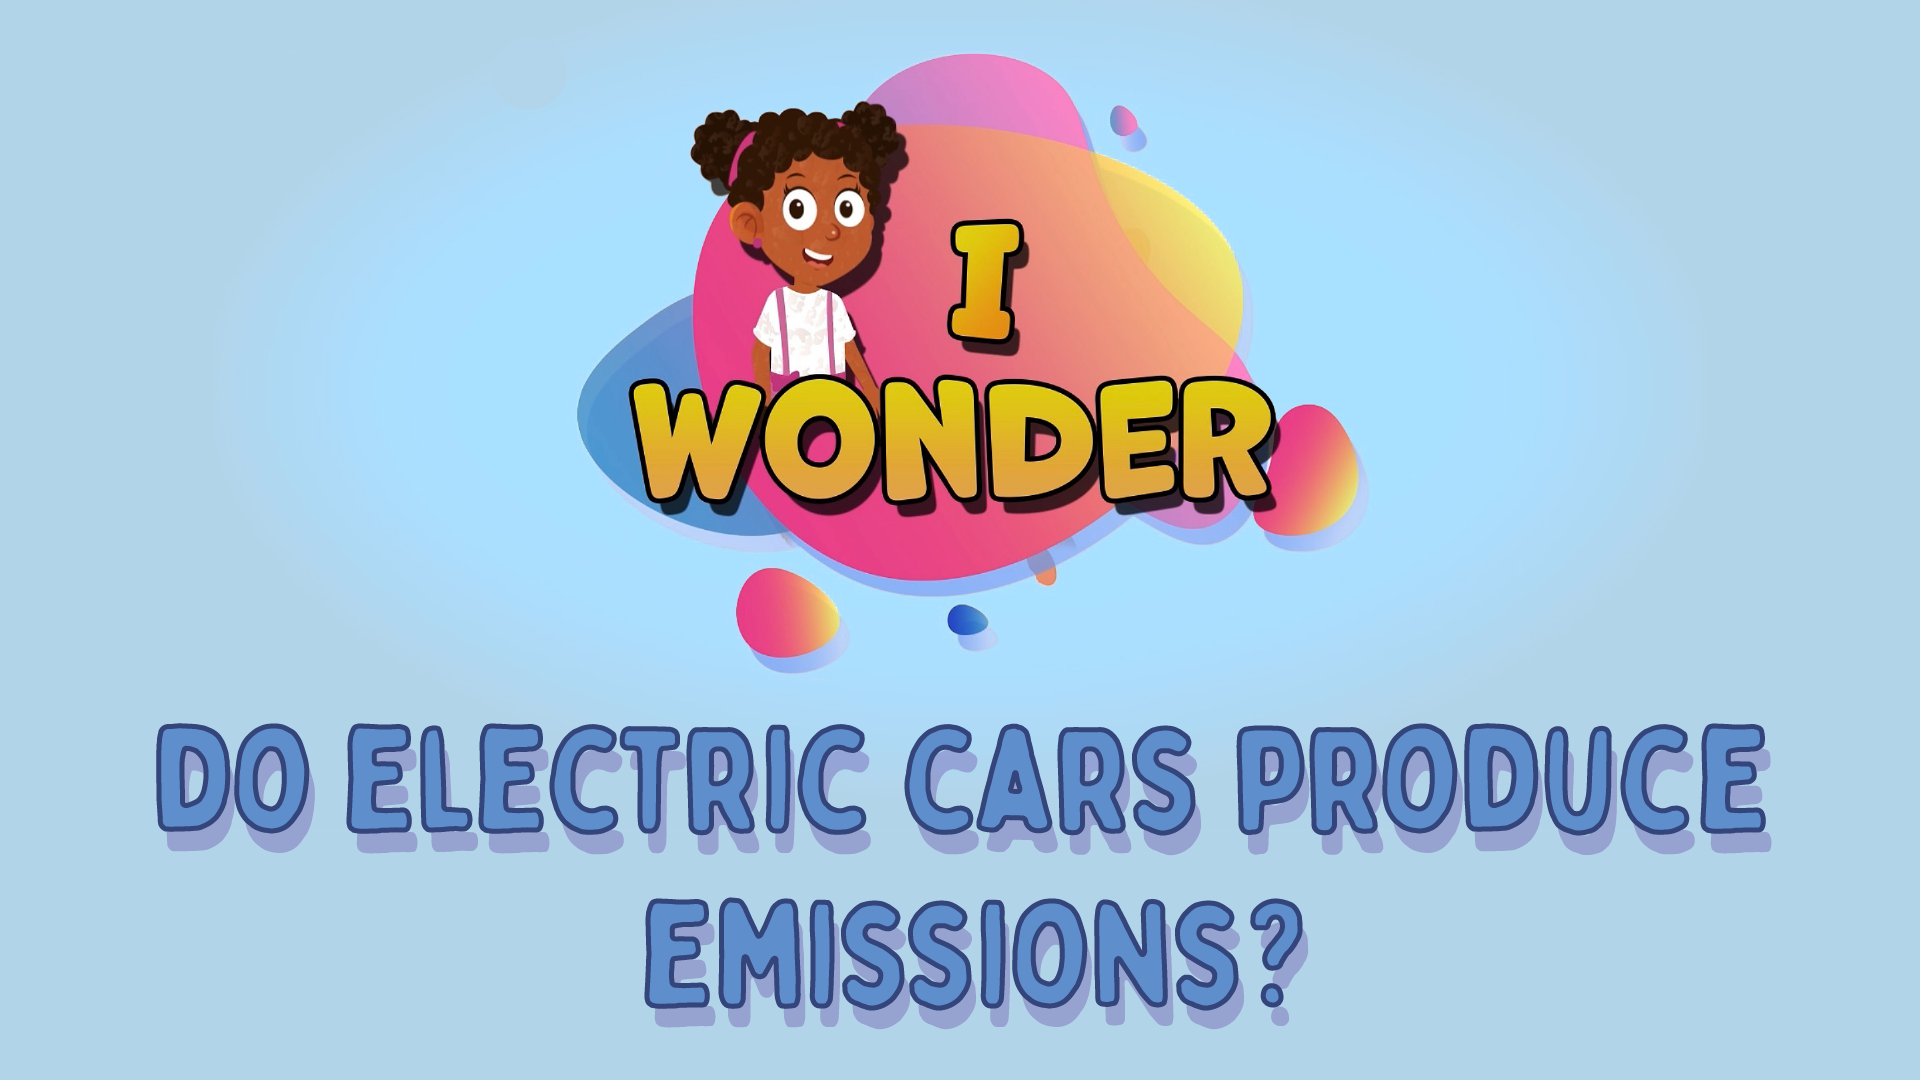 Do Electric Cars Produce Emissions?